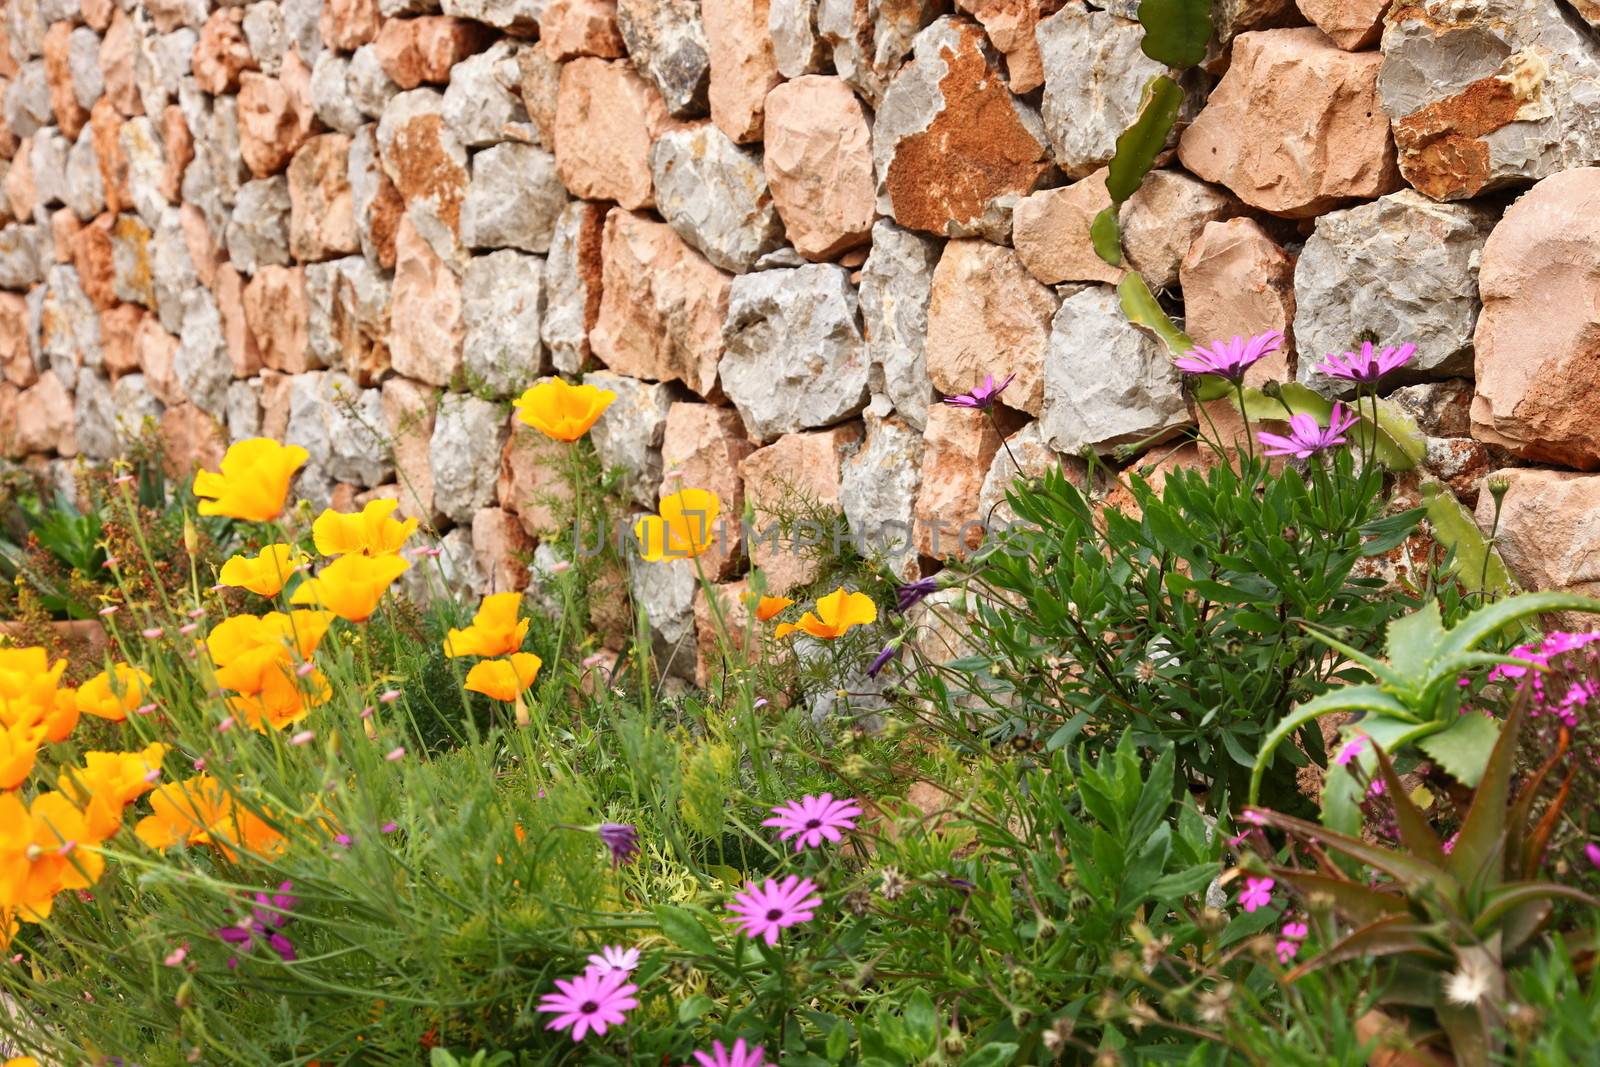 Dry stone wall and flowers by Farina6000